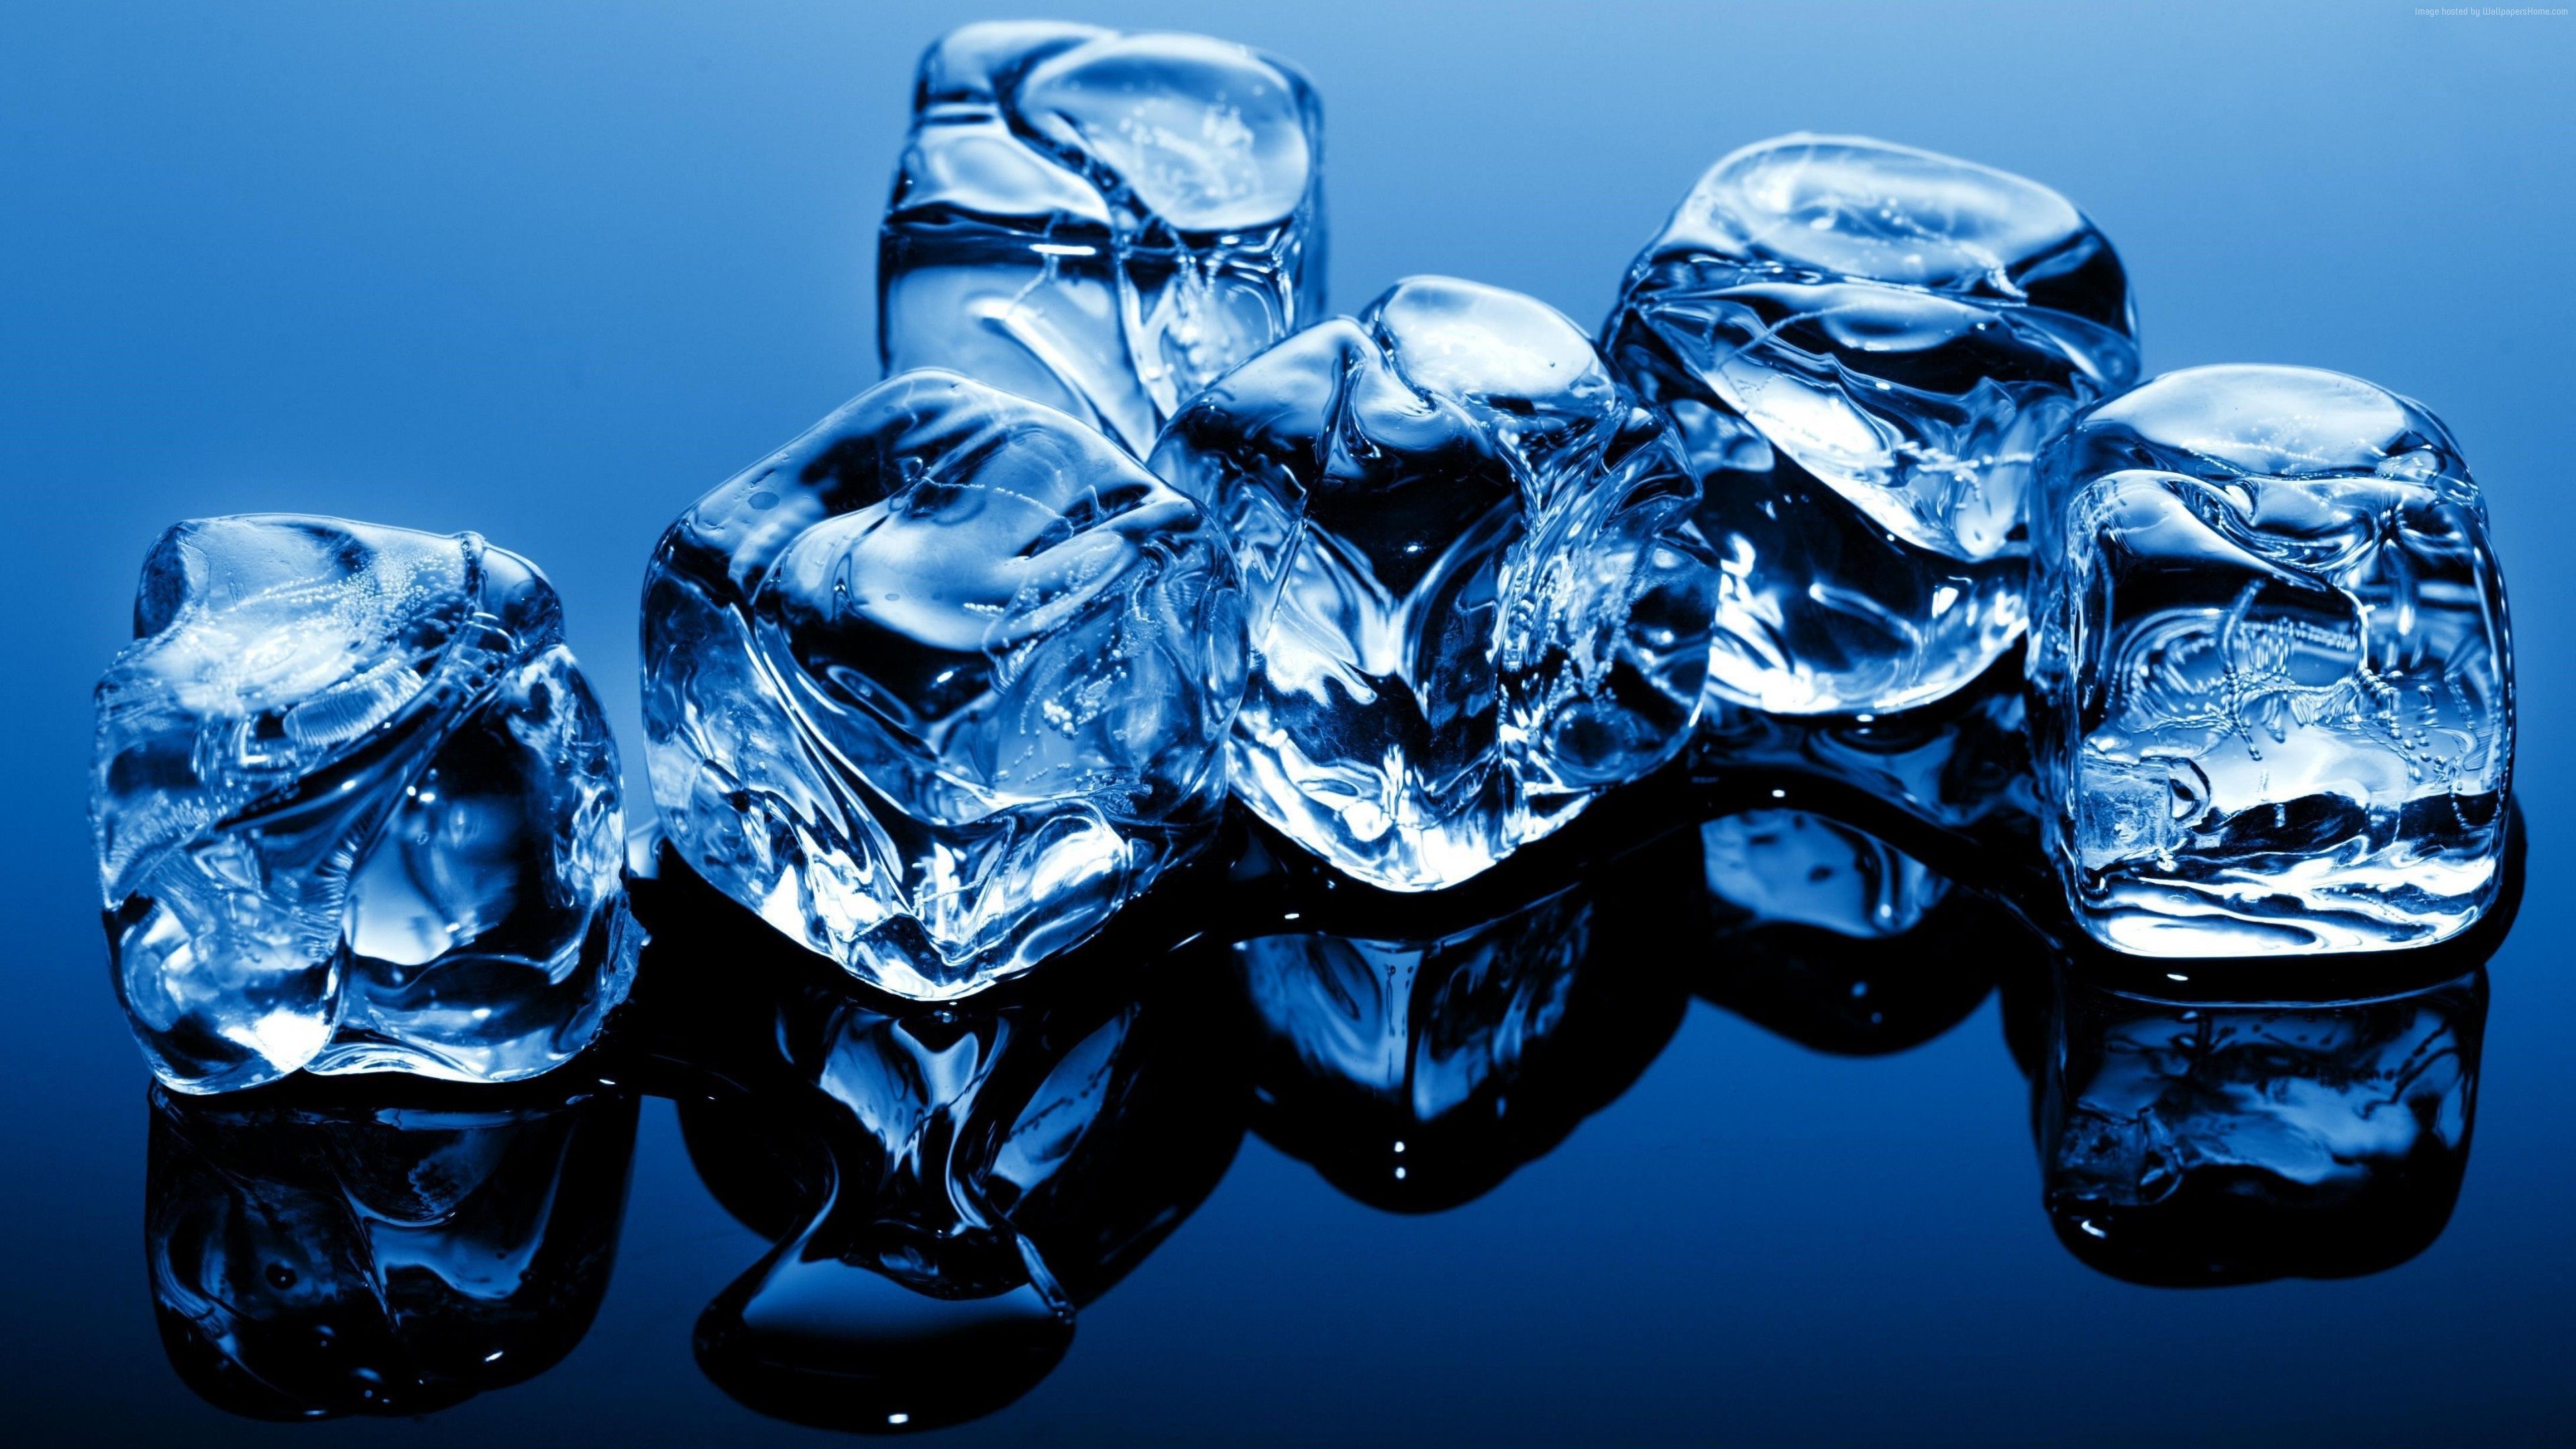 Wallpaper, water, blue, glass, crystal, ice cubes, melting, jewellery, macro photography 3840x2160